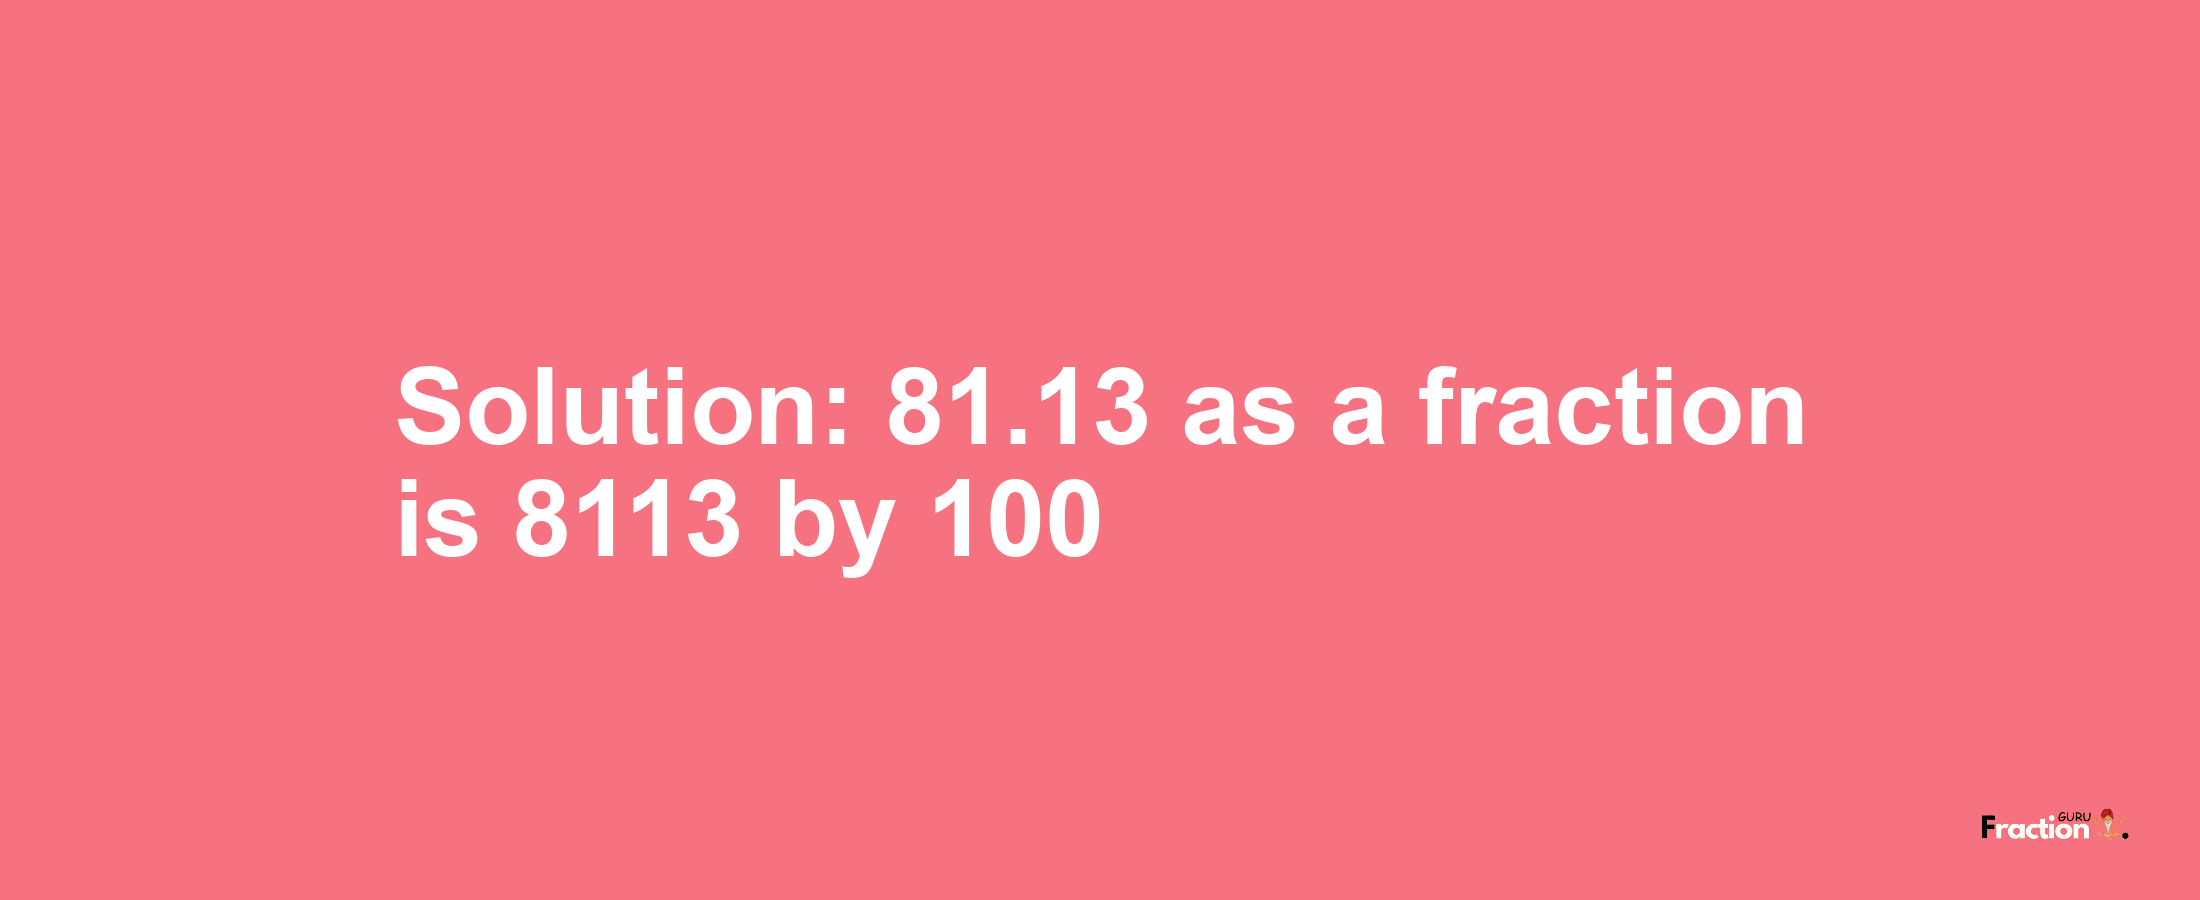 Solution:81.13 as a fraction is 8113/100